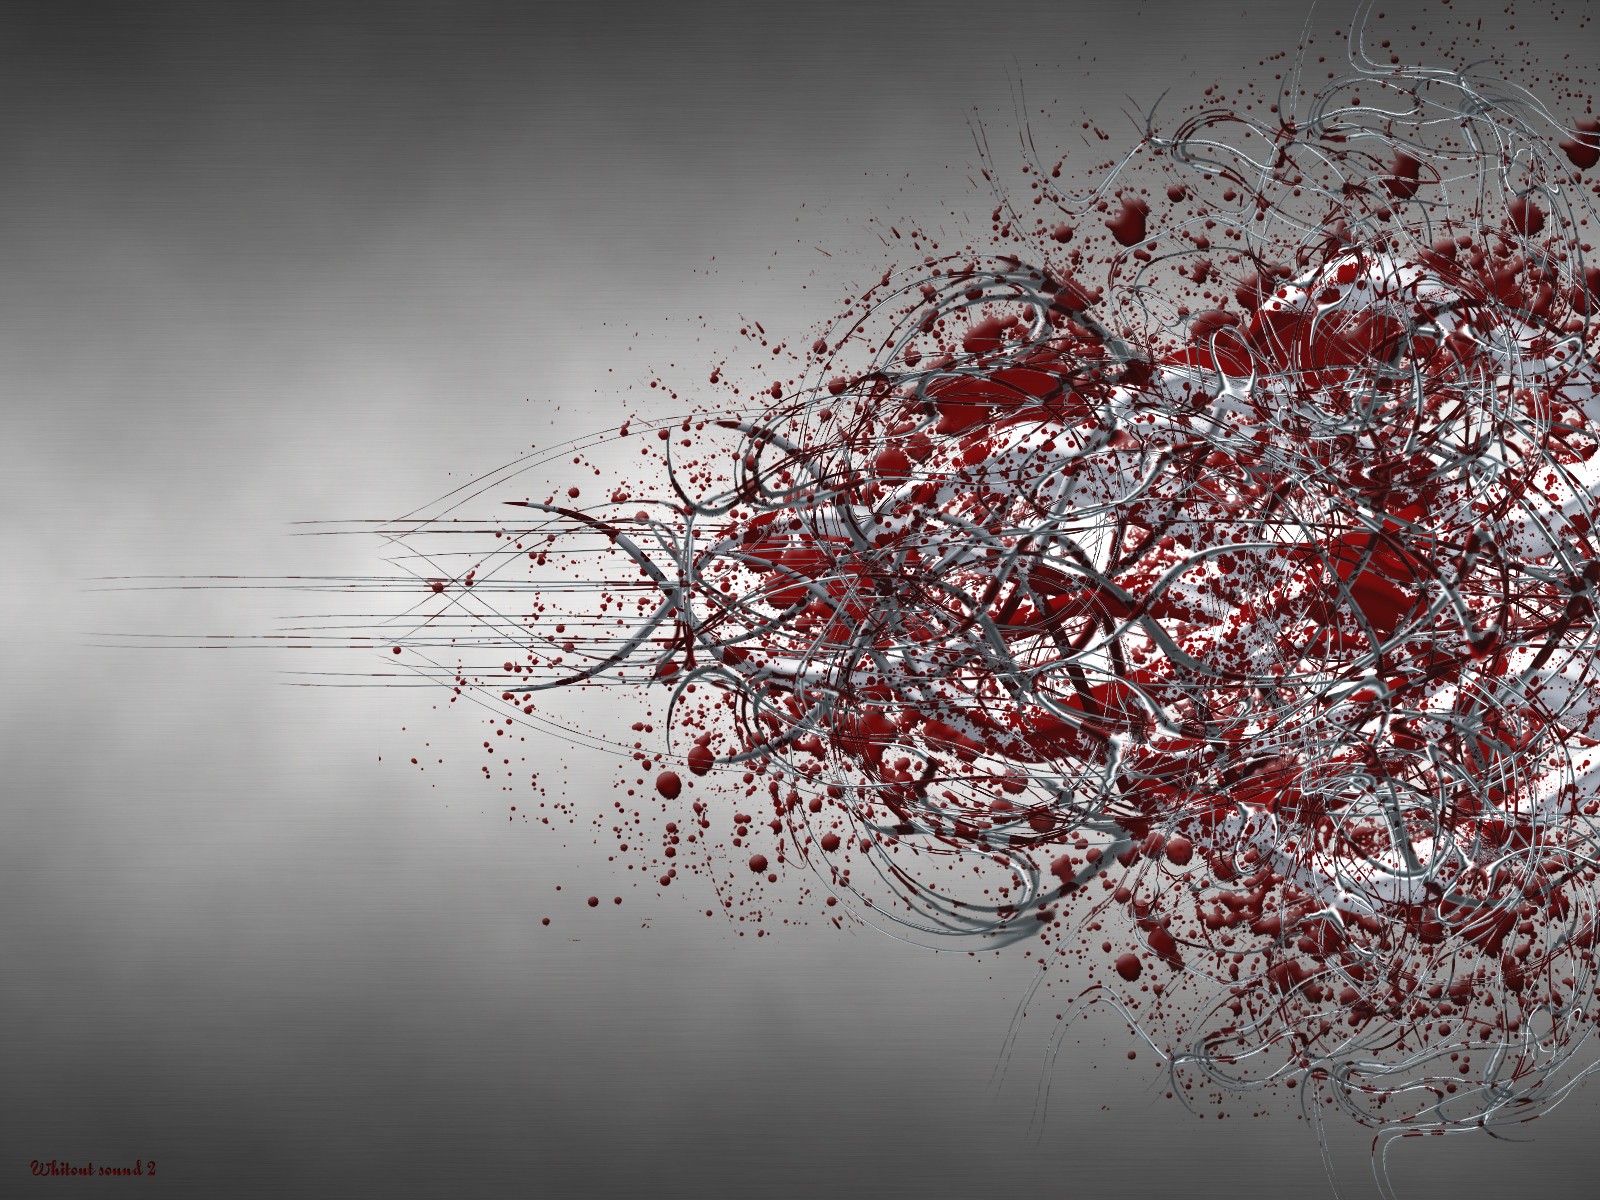 Wallpaper, abstract, water, reflection, sky, branch, blood spatter, tree, 1600x1200 px, twig, computer wallpaper, graphy 1600x1200